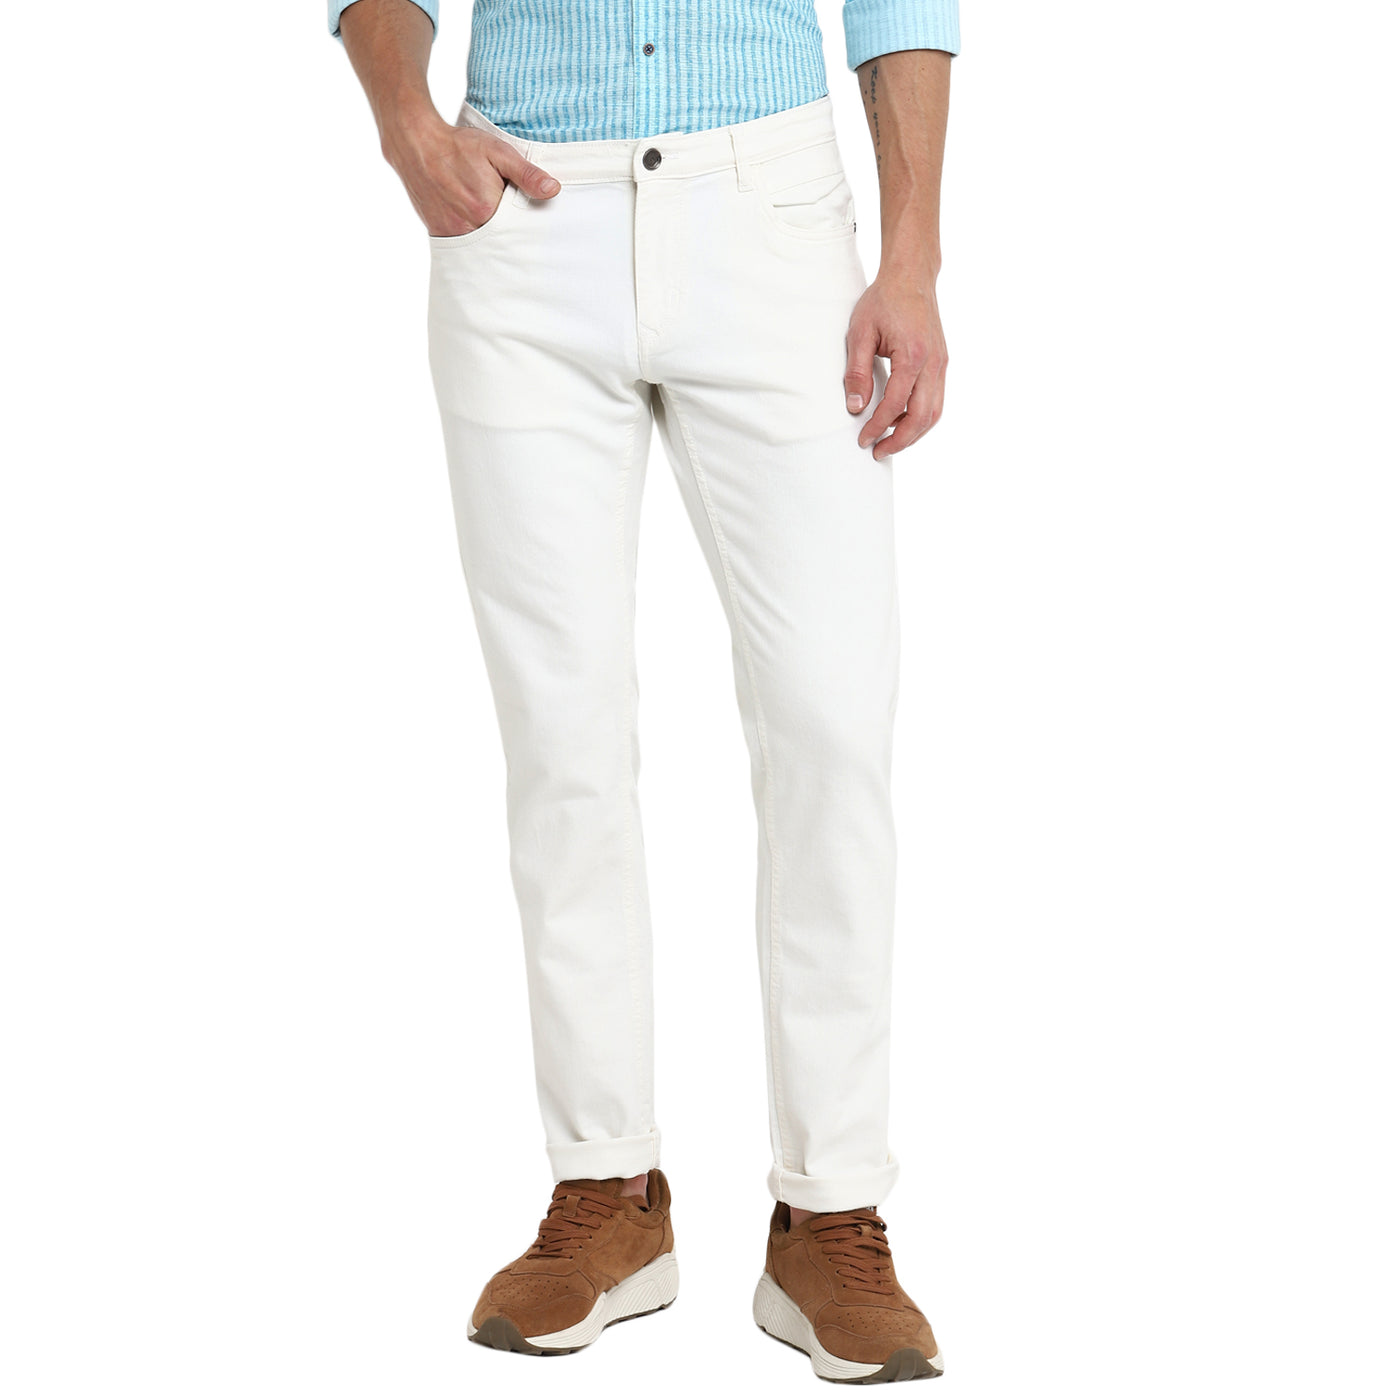 White Narrow Fit Cotton Stretch Jeans